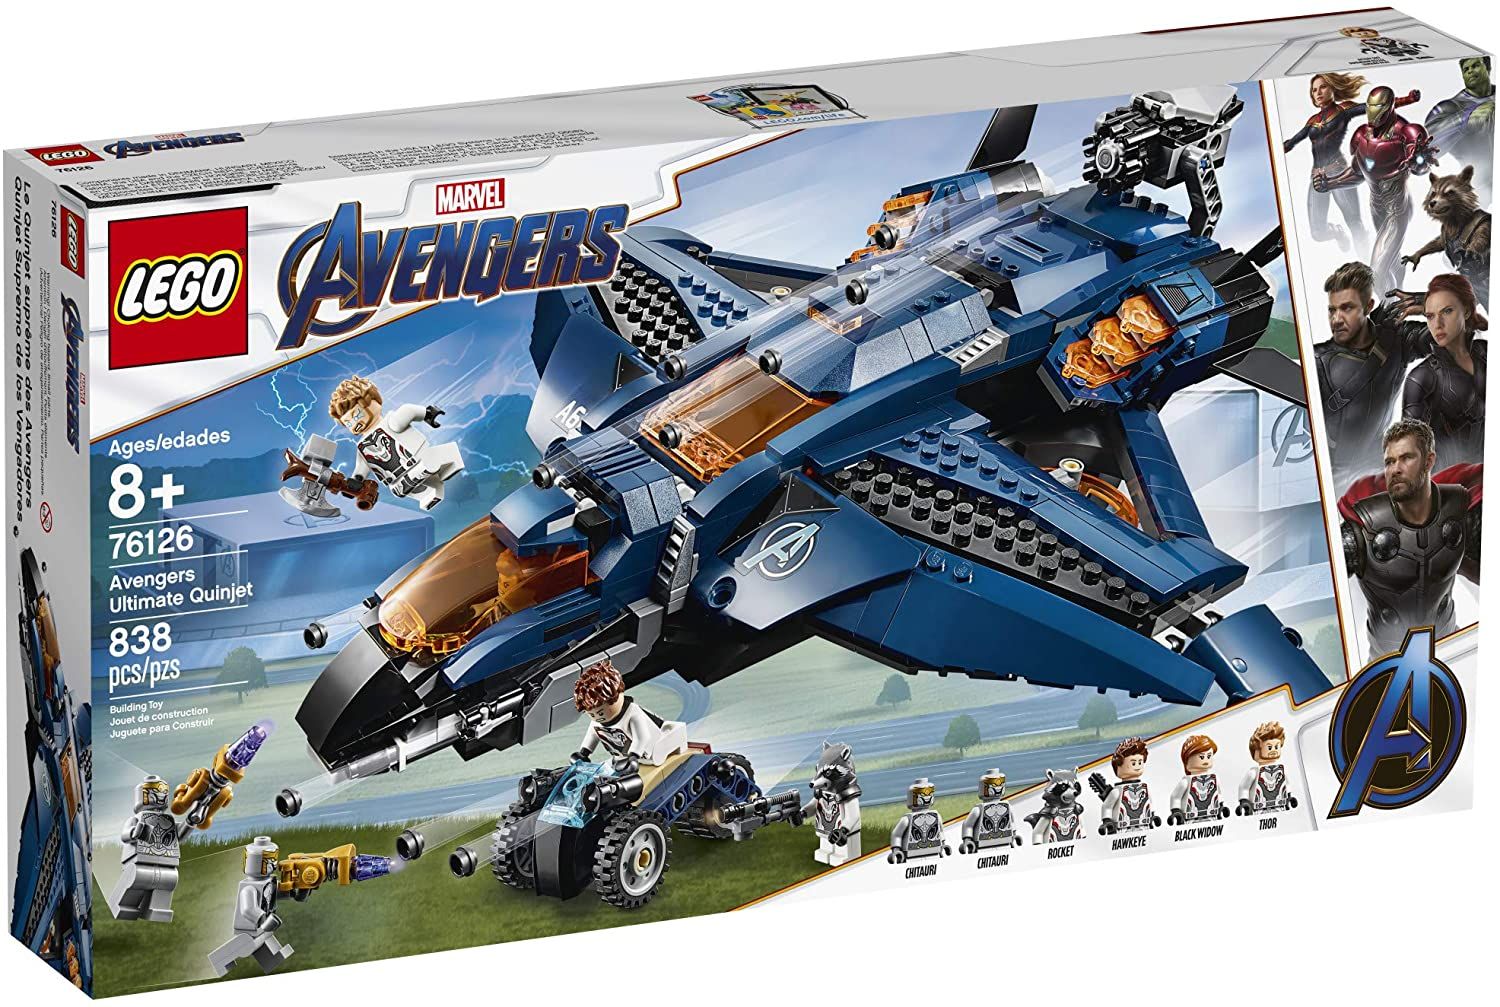 10-best-lego-sets-updated-2020